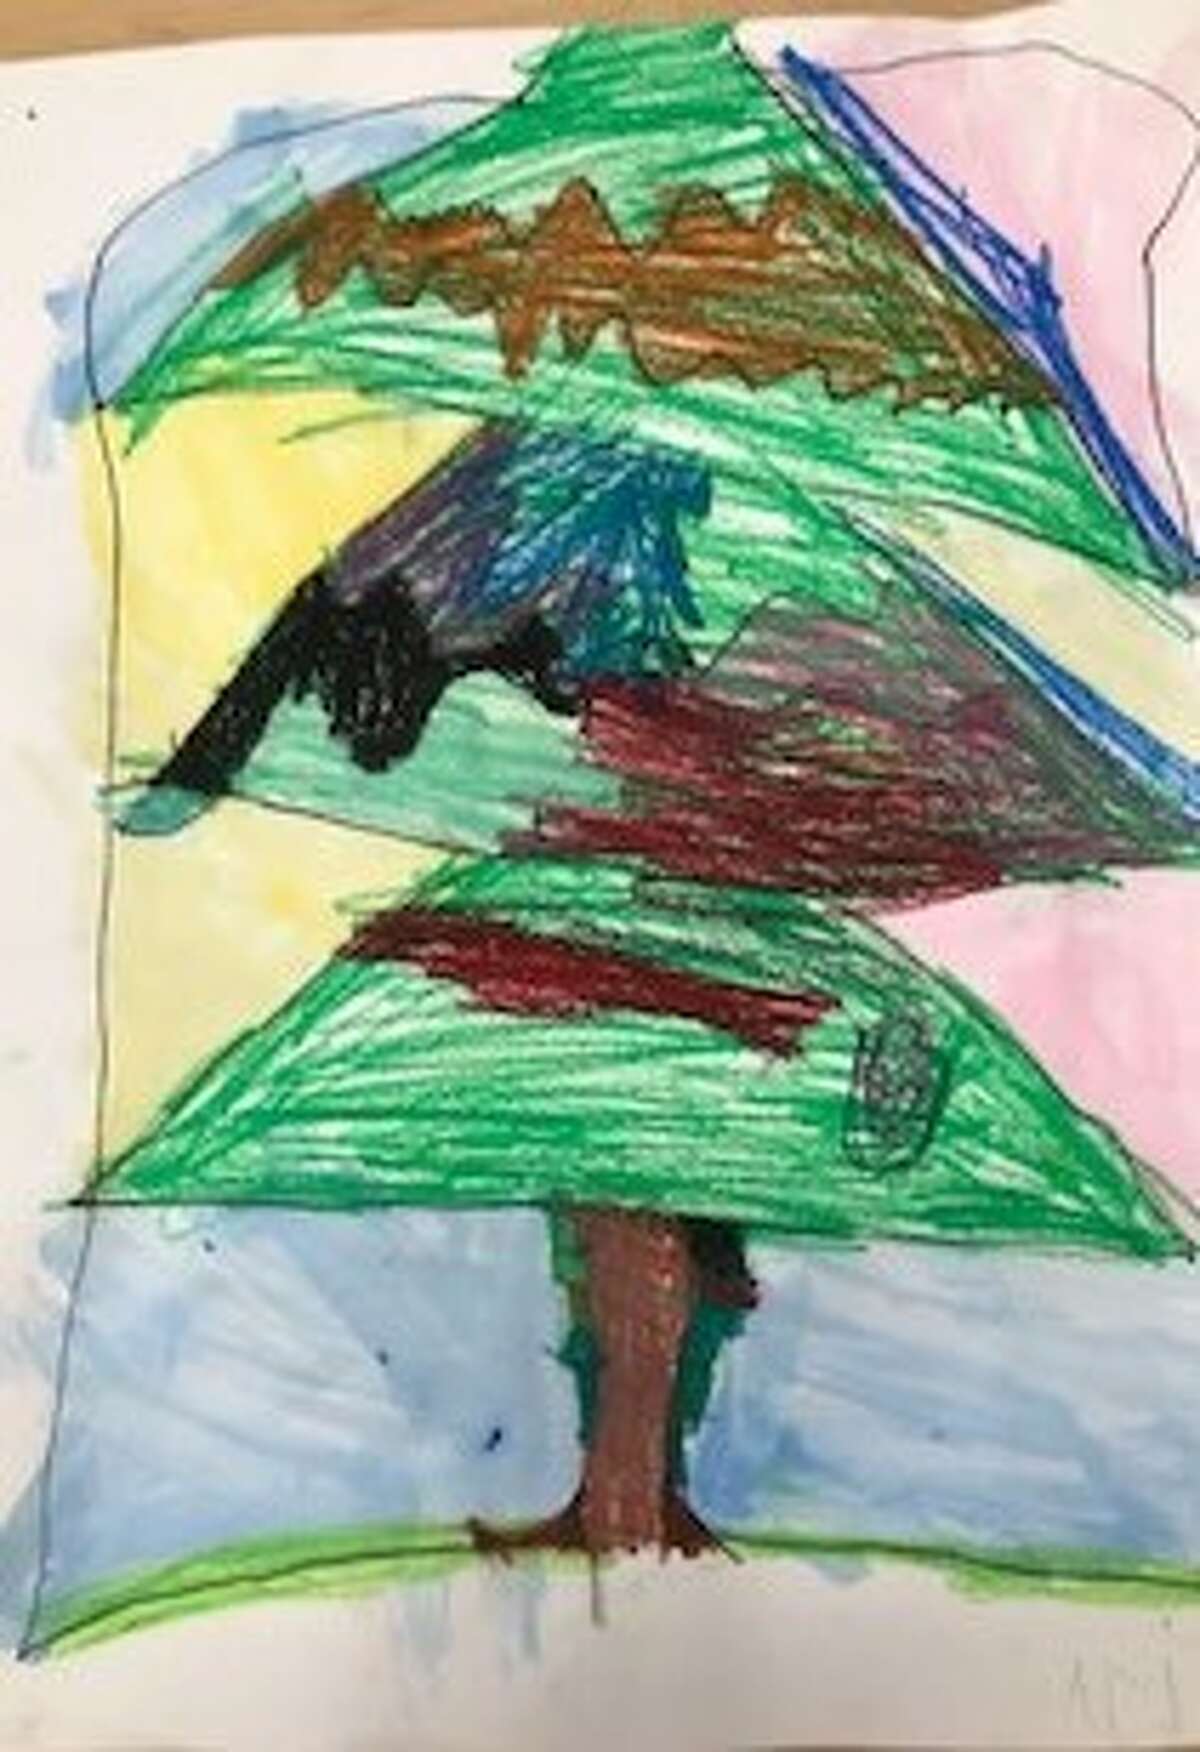 An entry from school children around the Capital Region for the 2020 Holiday Card Contest.